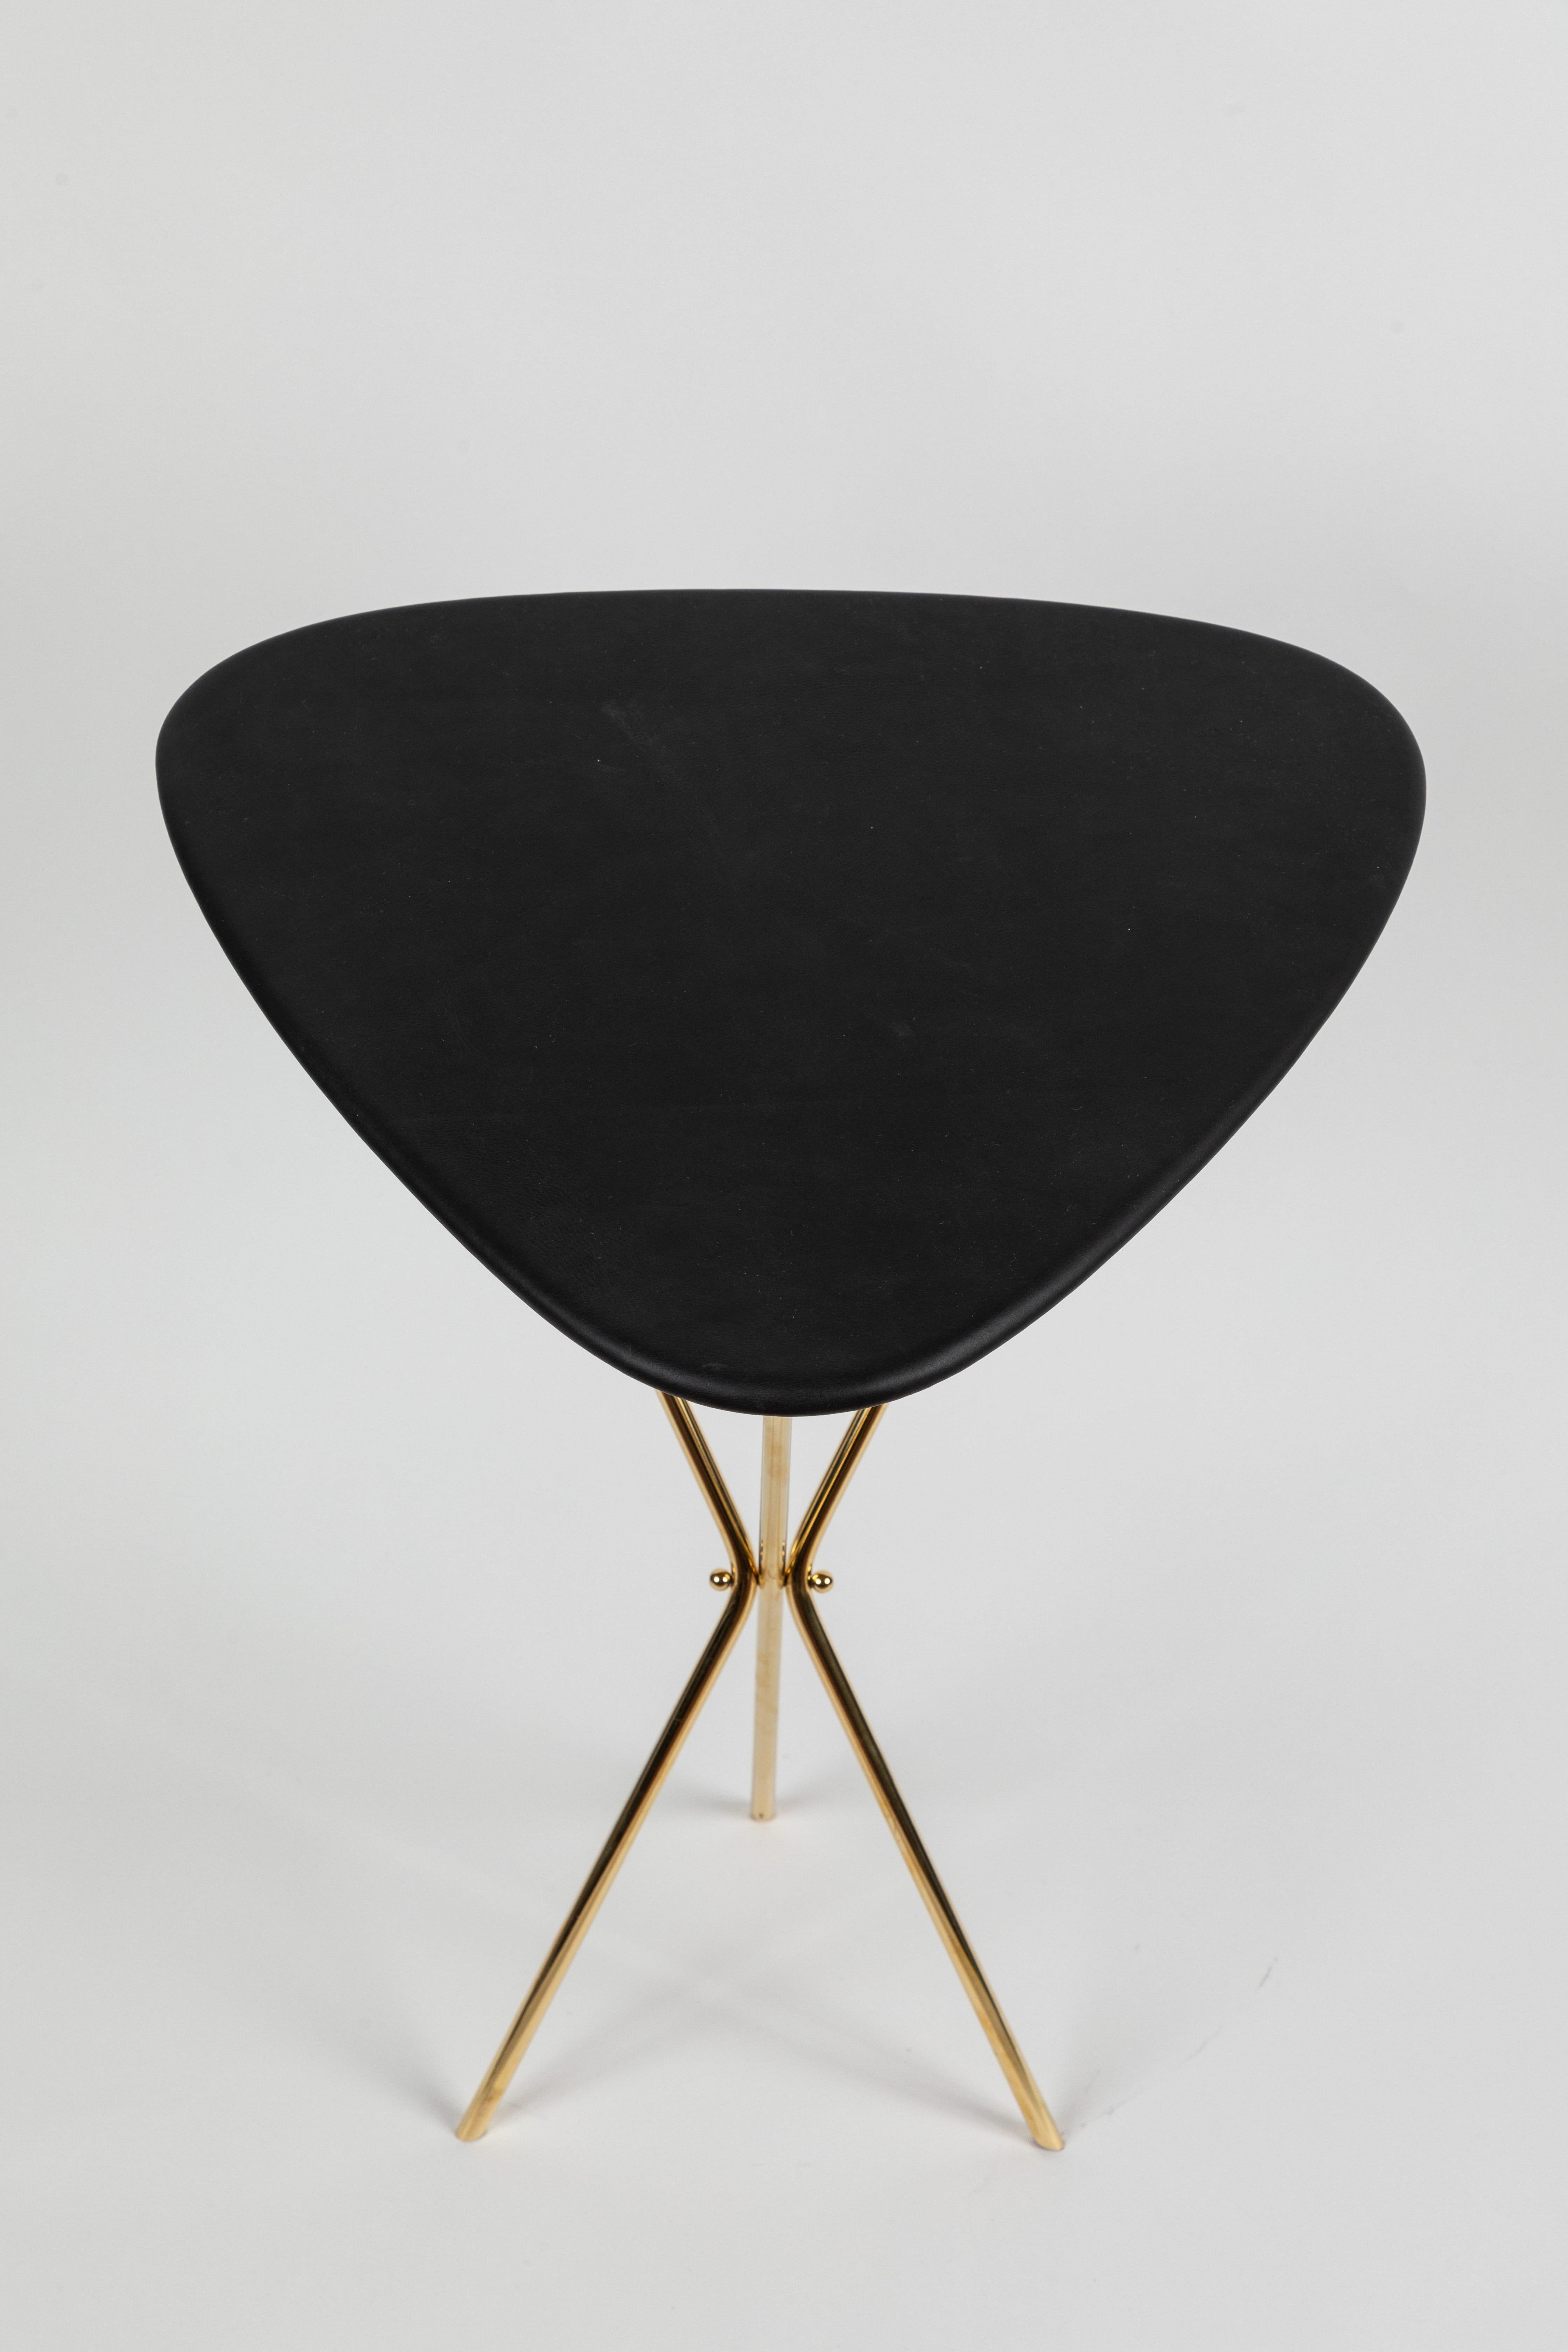 Austrian Carl Auböck Model #3642 Brass and Leather Table For Sale